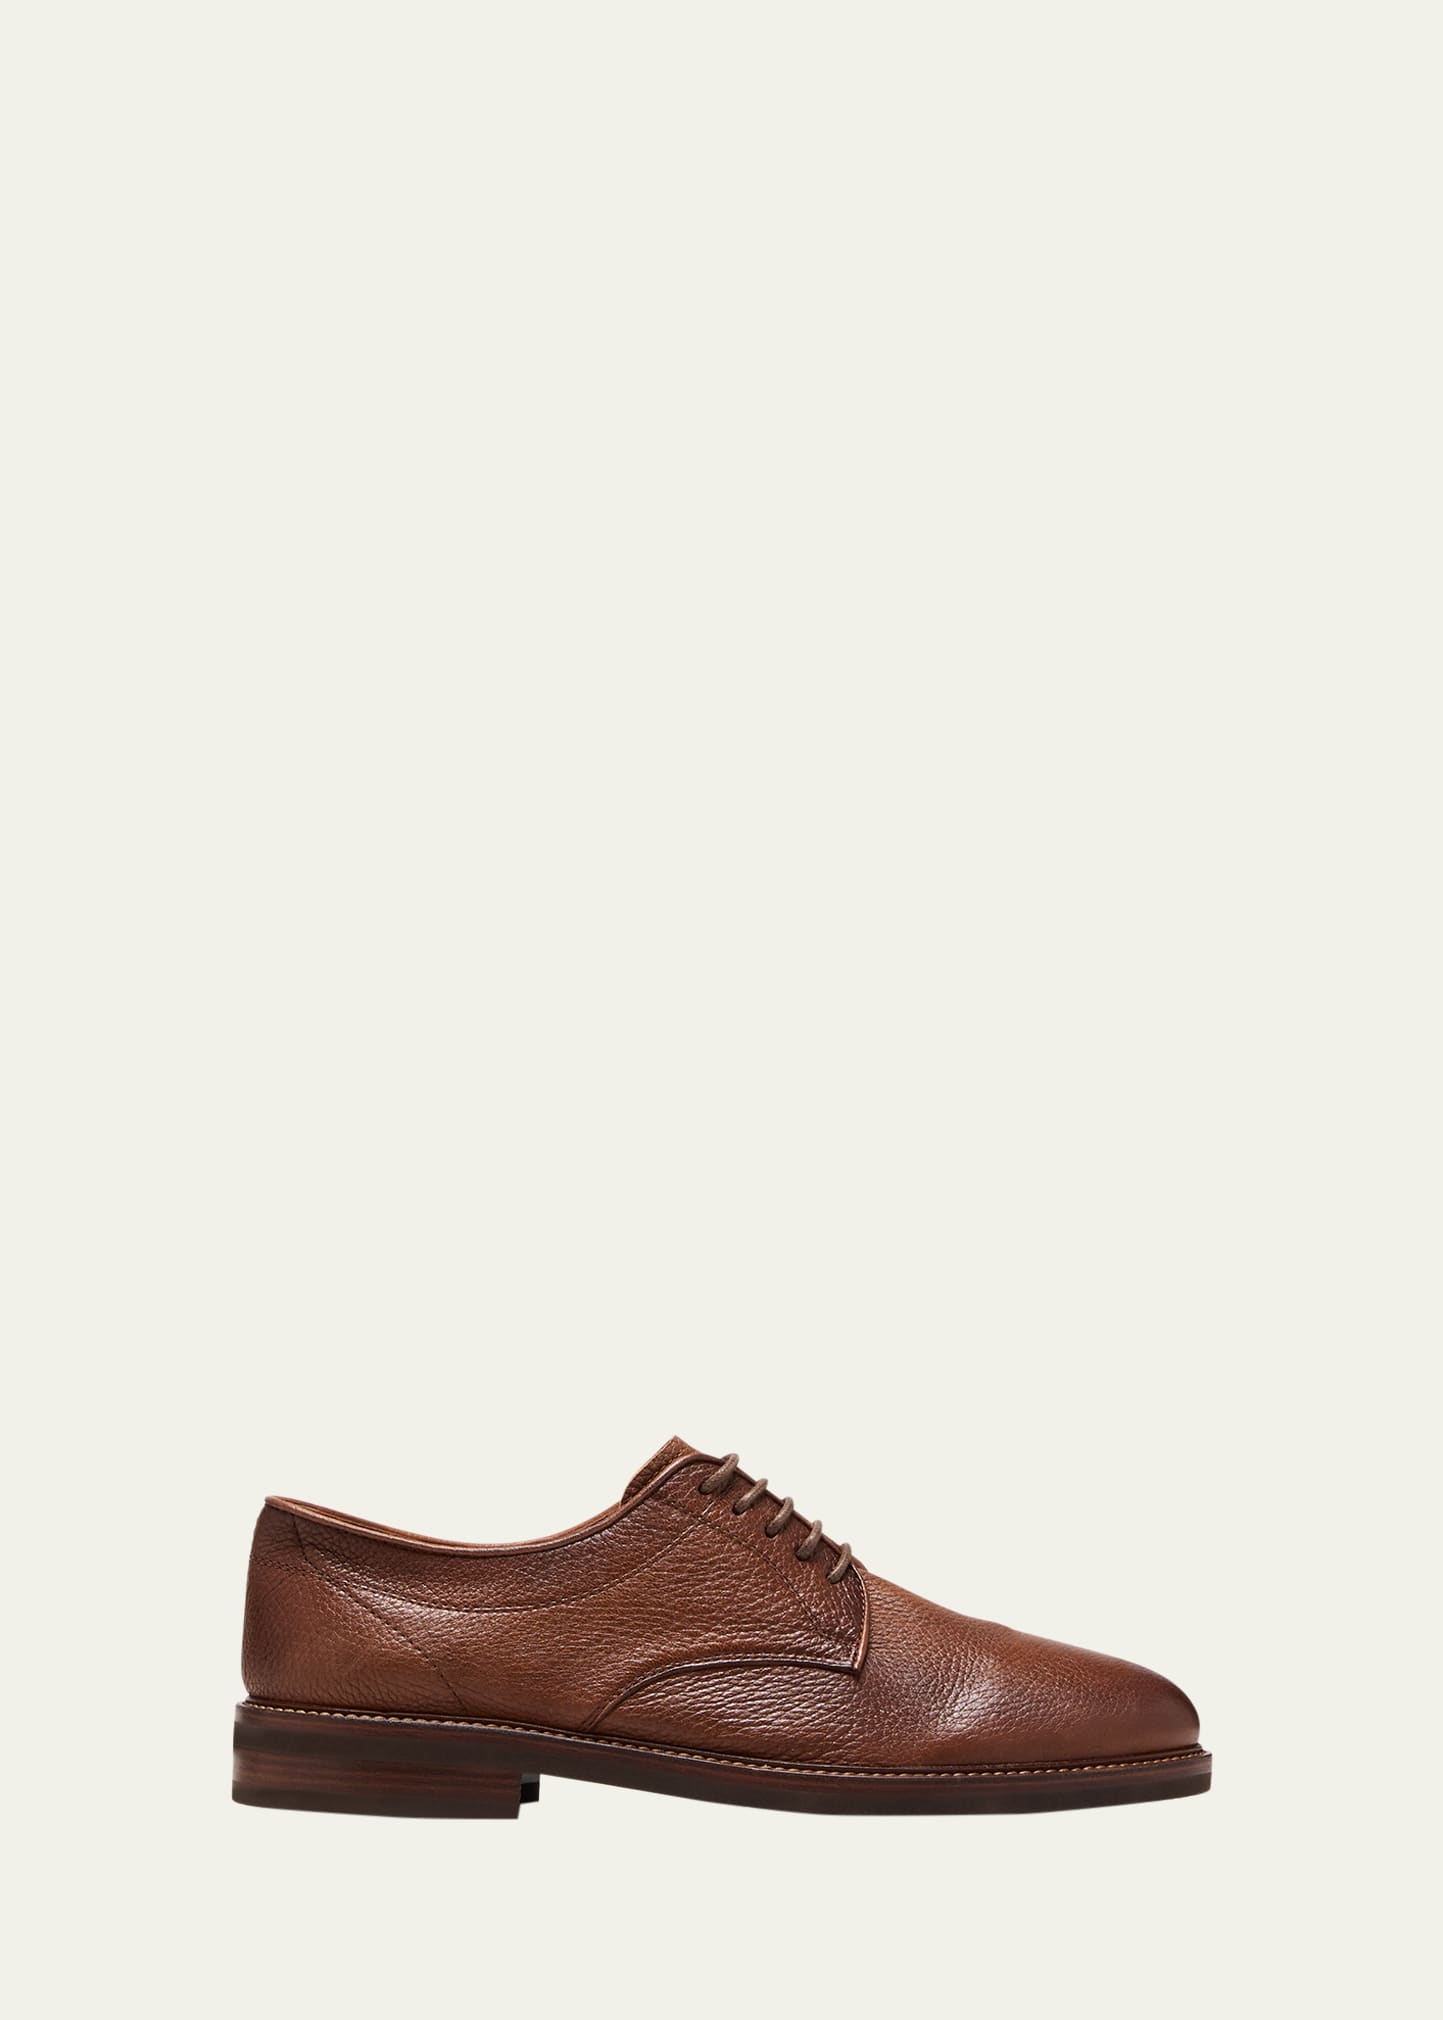 Brunello Cucinelli Men's Soft Leather Derby Shoes In Whisk